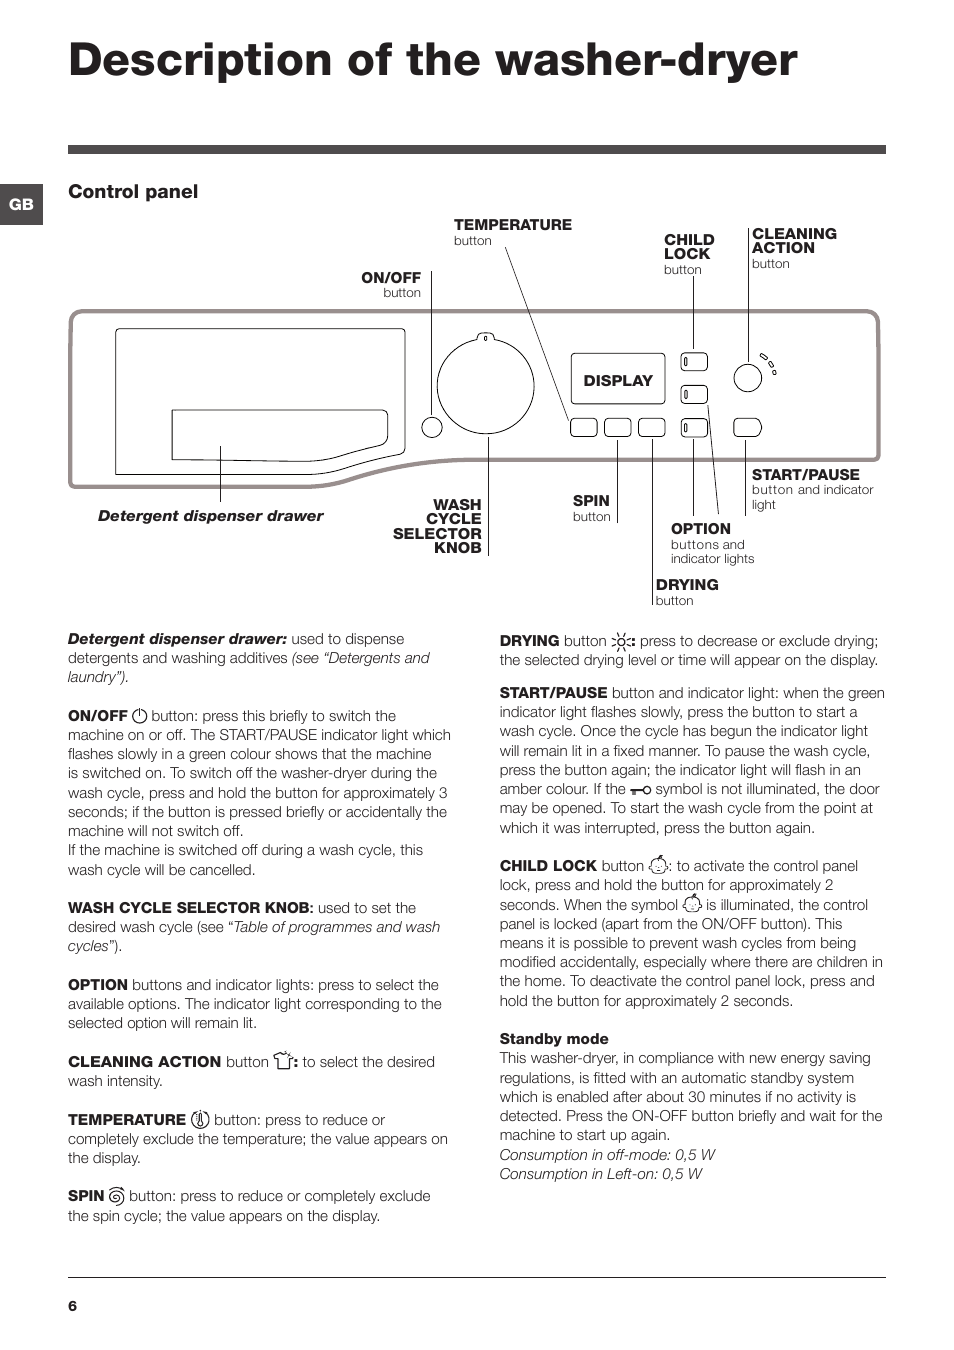 Description of the washer-dryer, Control panel | Hotpoint Ariston WDG 8640B  EU User Manual | Page 6 / 84